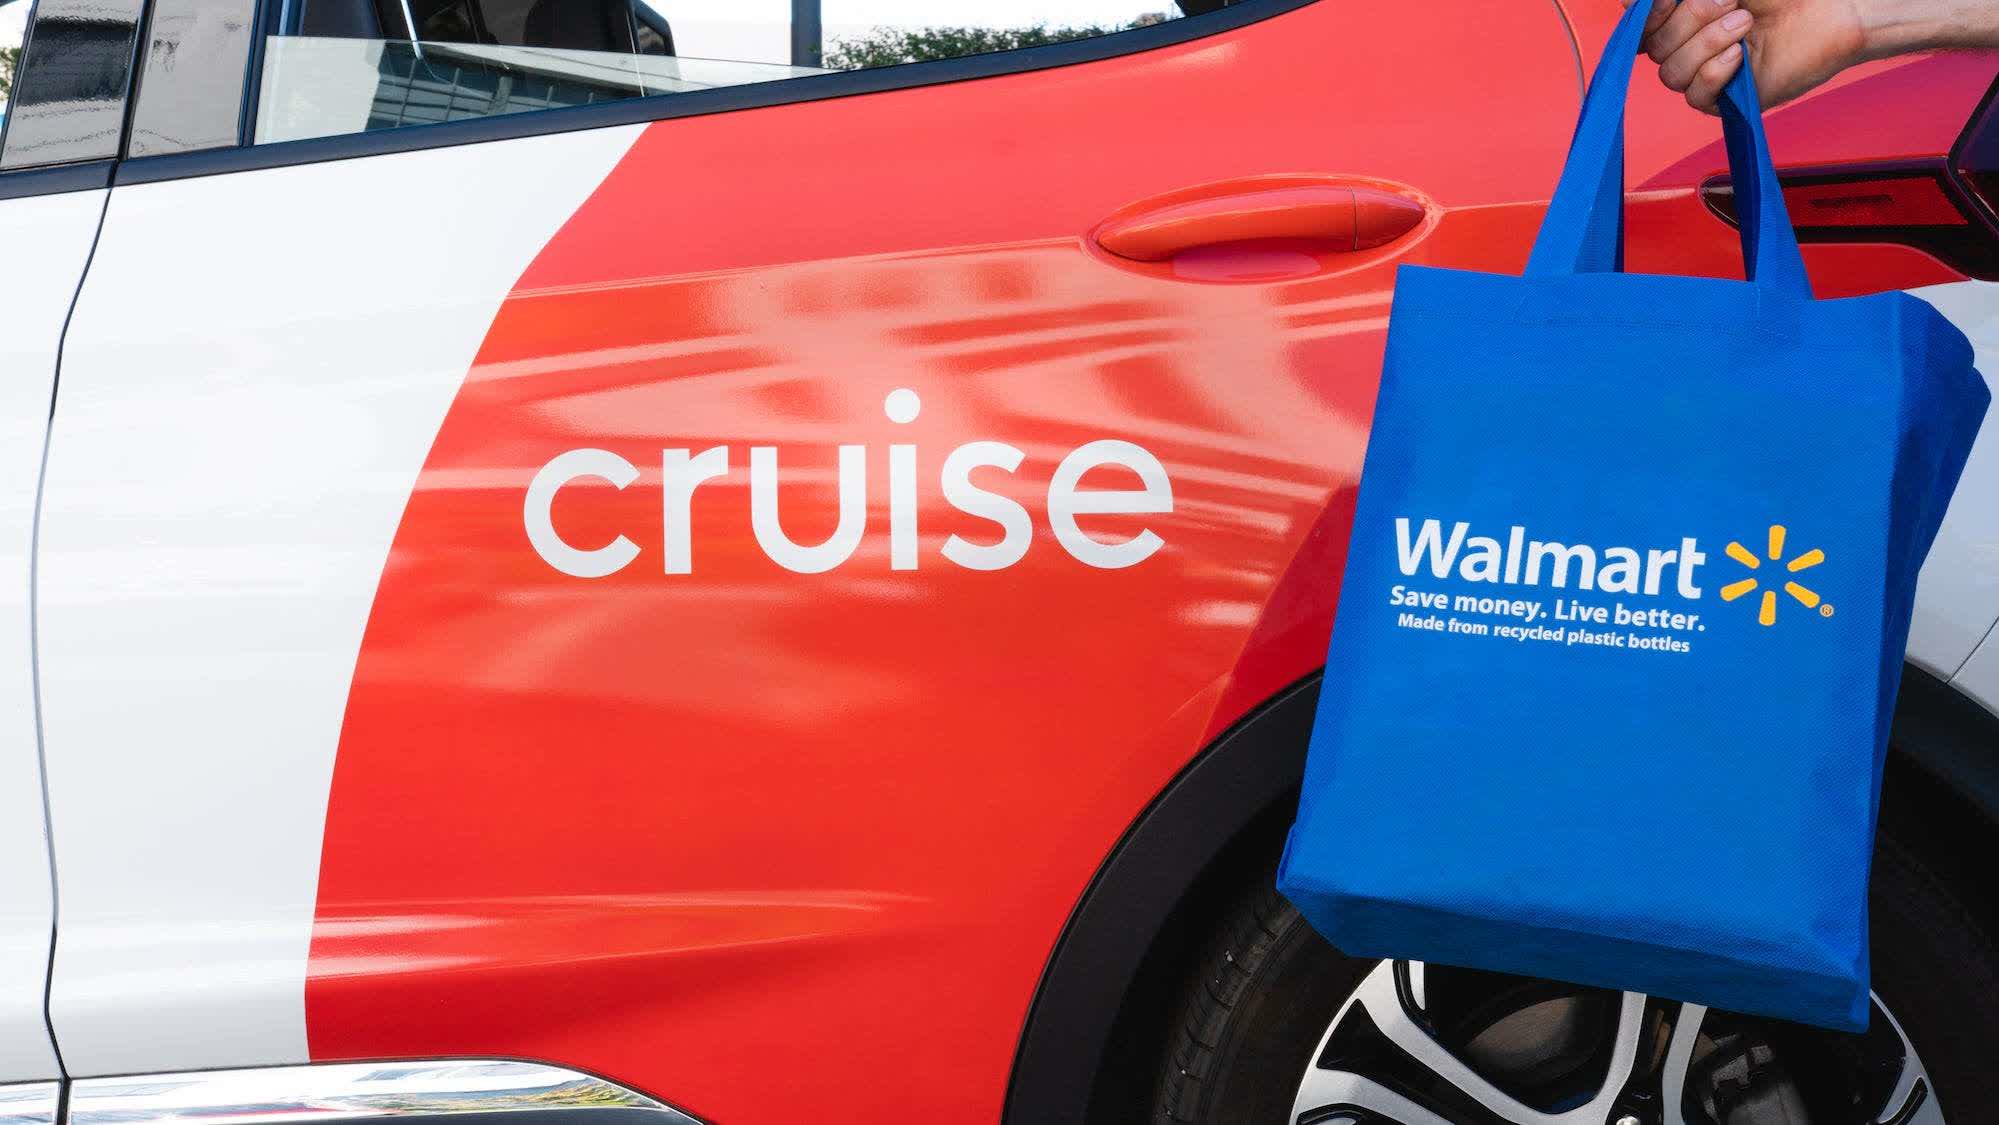 Walmart invests in self-driving car start-up Cruise to expand last-mile delivery ecosystem